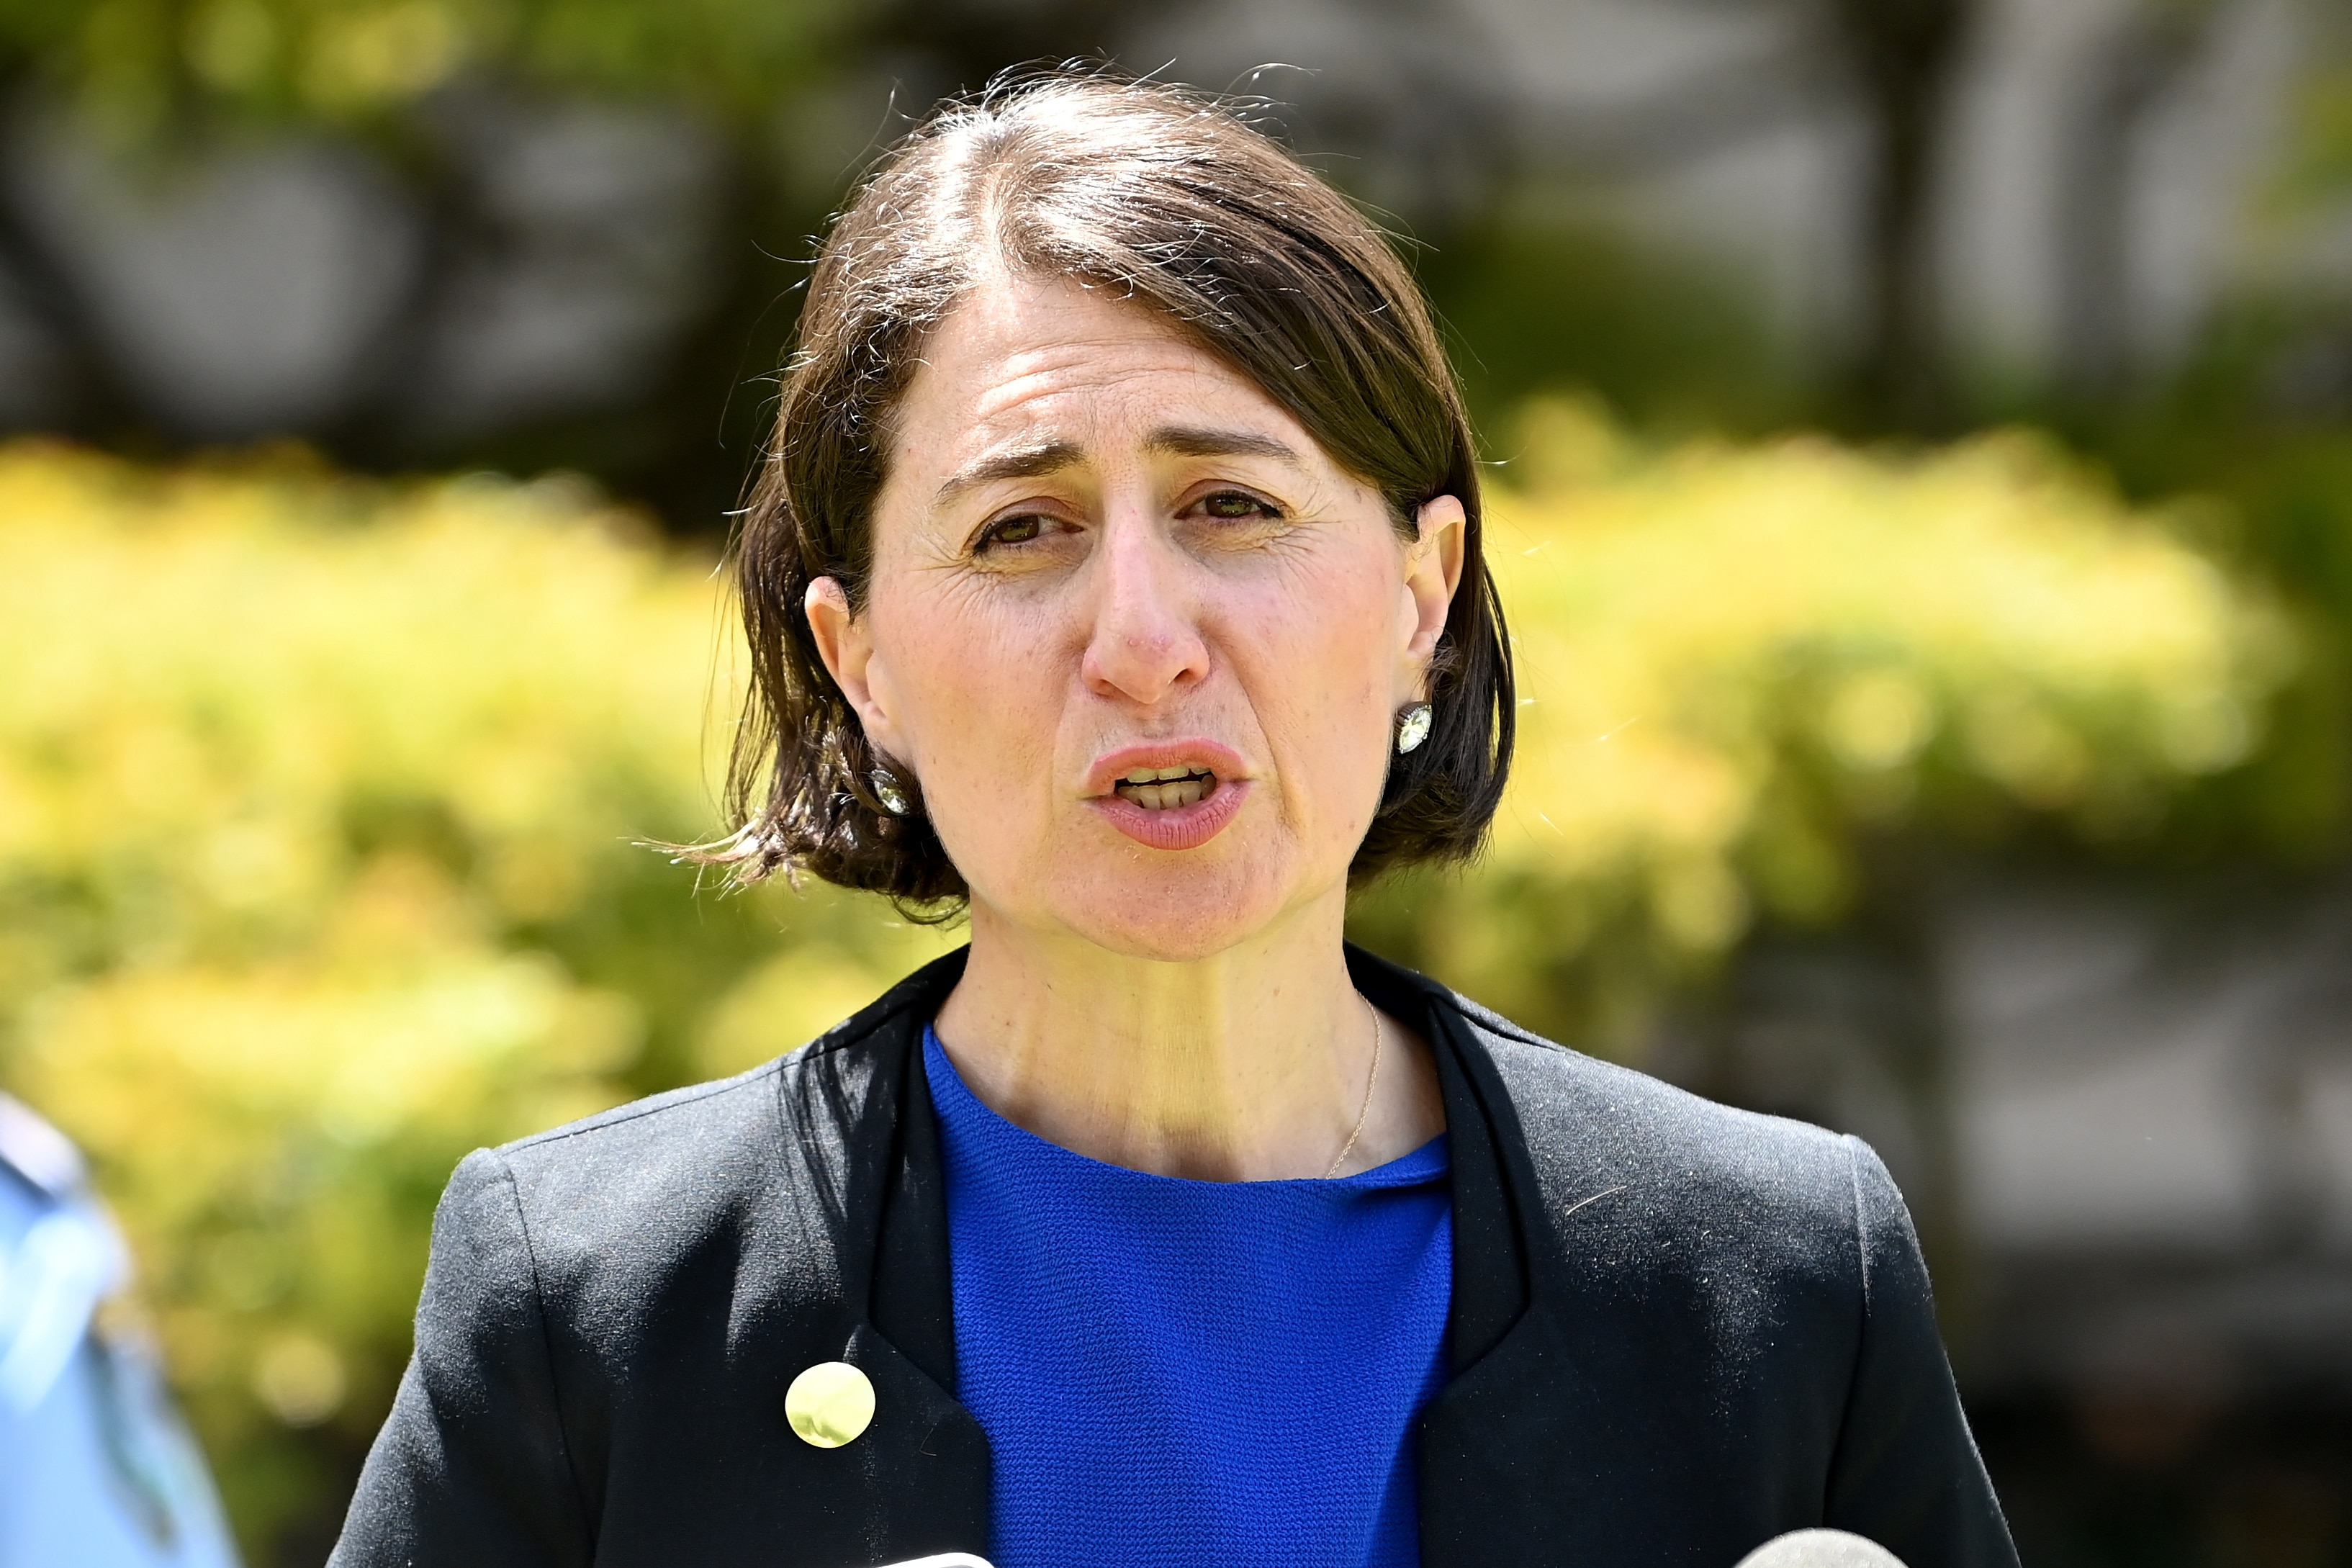 NSW Premier Gladys Berejiklian has rejected calls she failed to isolate after a coronavirus test.